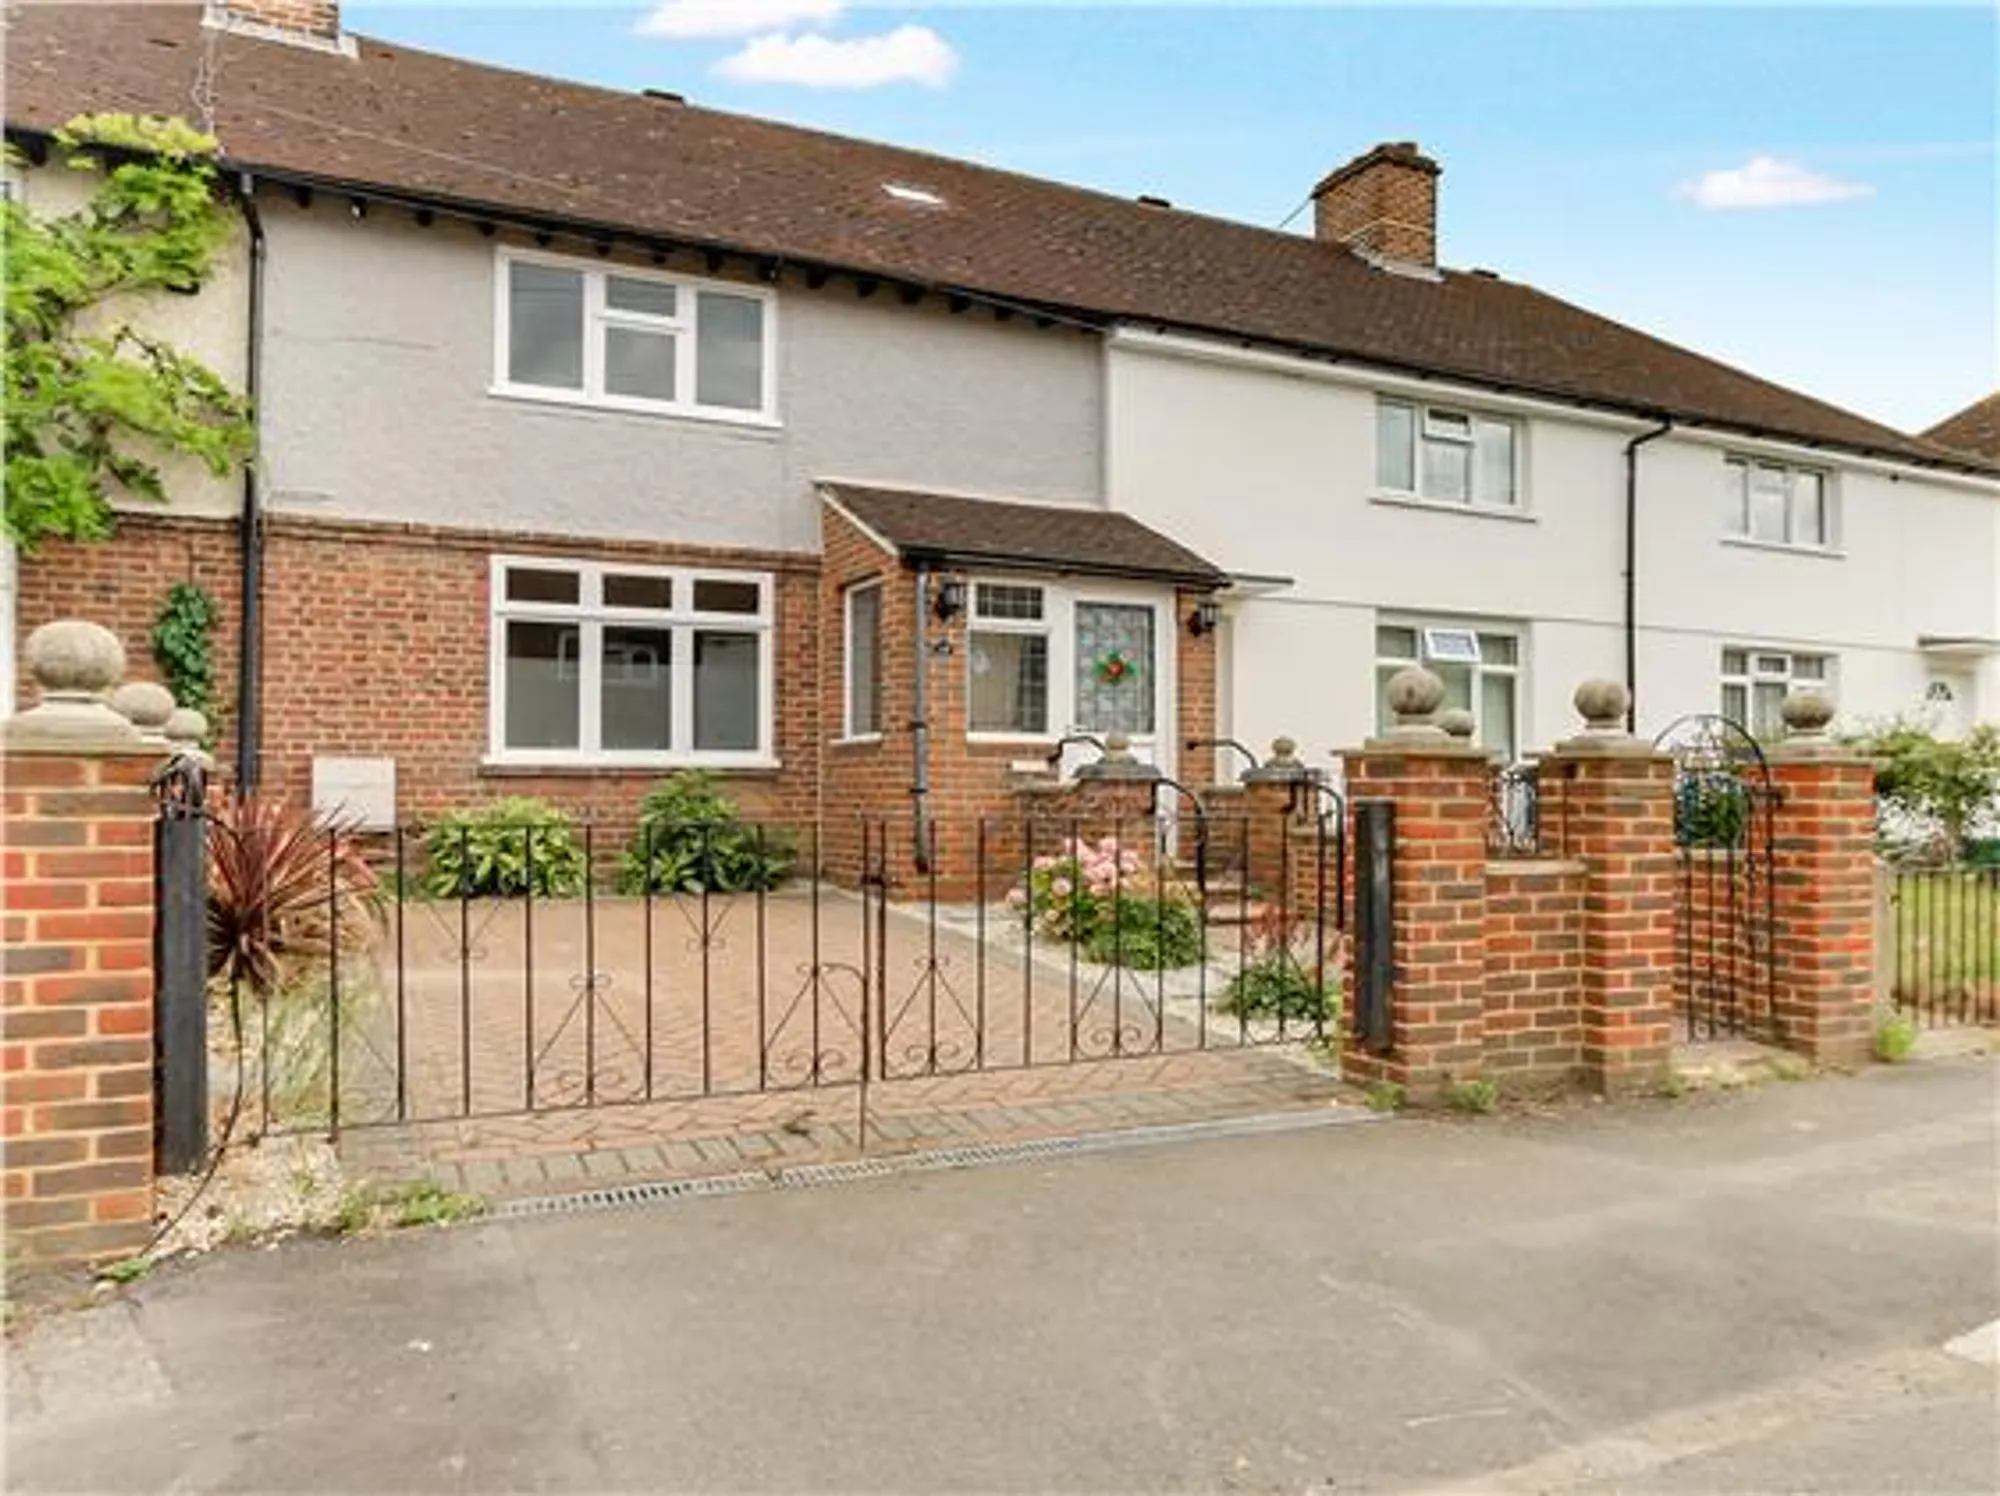 3 bed mid-terraced house for sale in Charter Road, Kingston Upon Thames - Property Image 1